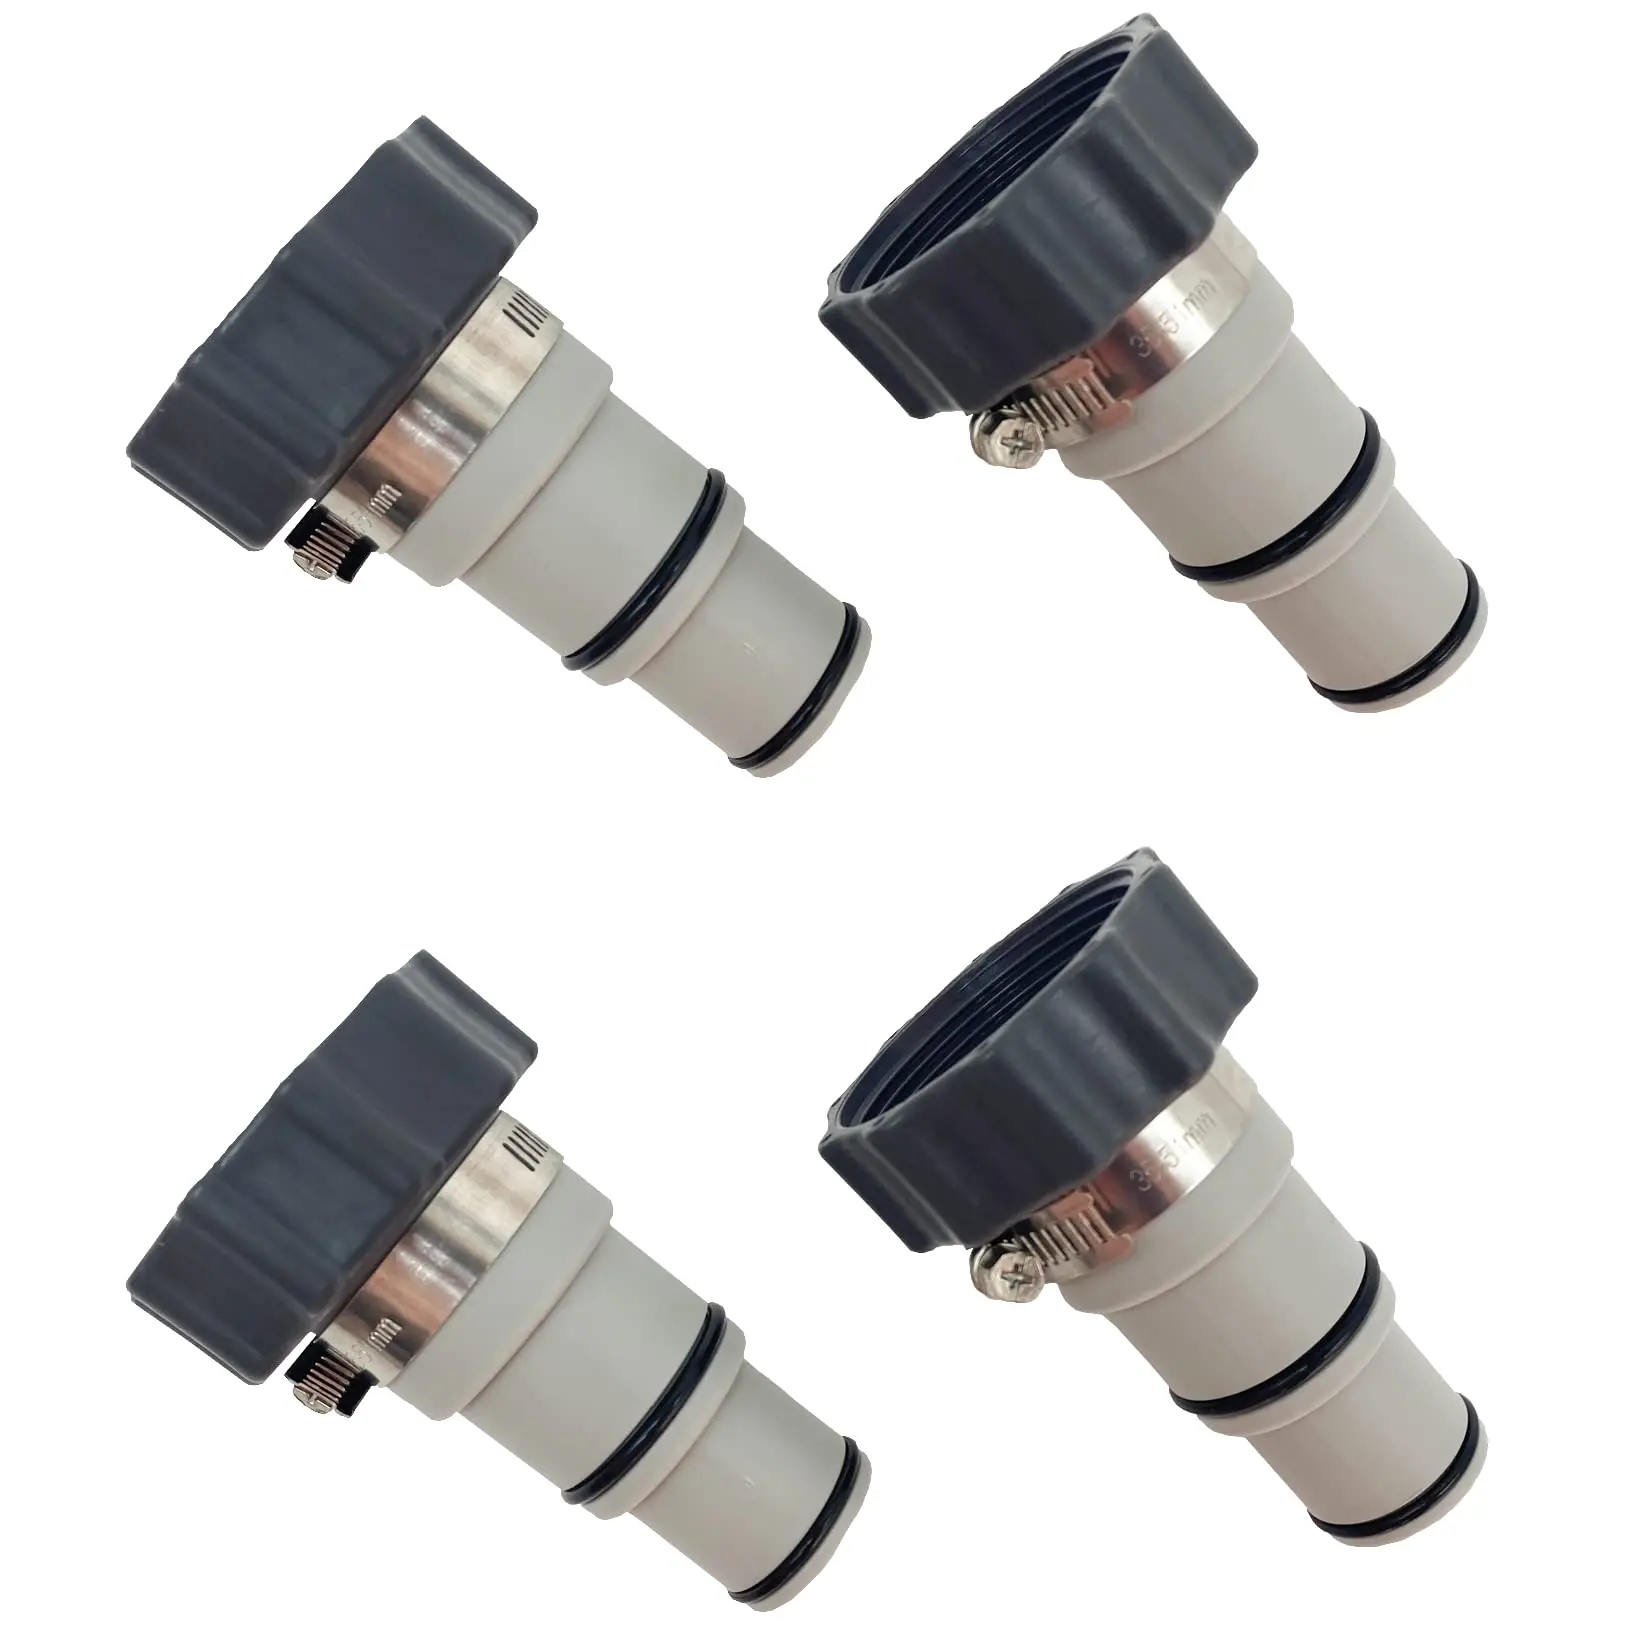 

1.5" to 1.25" Hose Adapter Plunger Valve Connector for Intex Above Ground Pool 1500 2000 2500 4000 GPH Filter Pump(4 PCS)